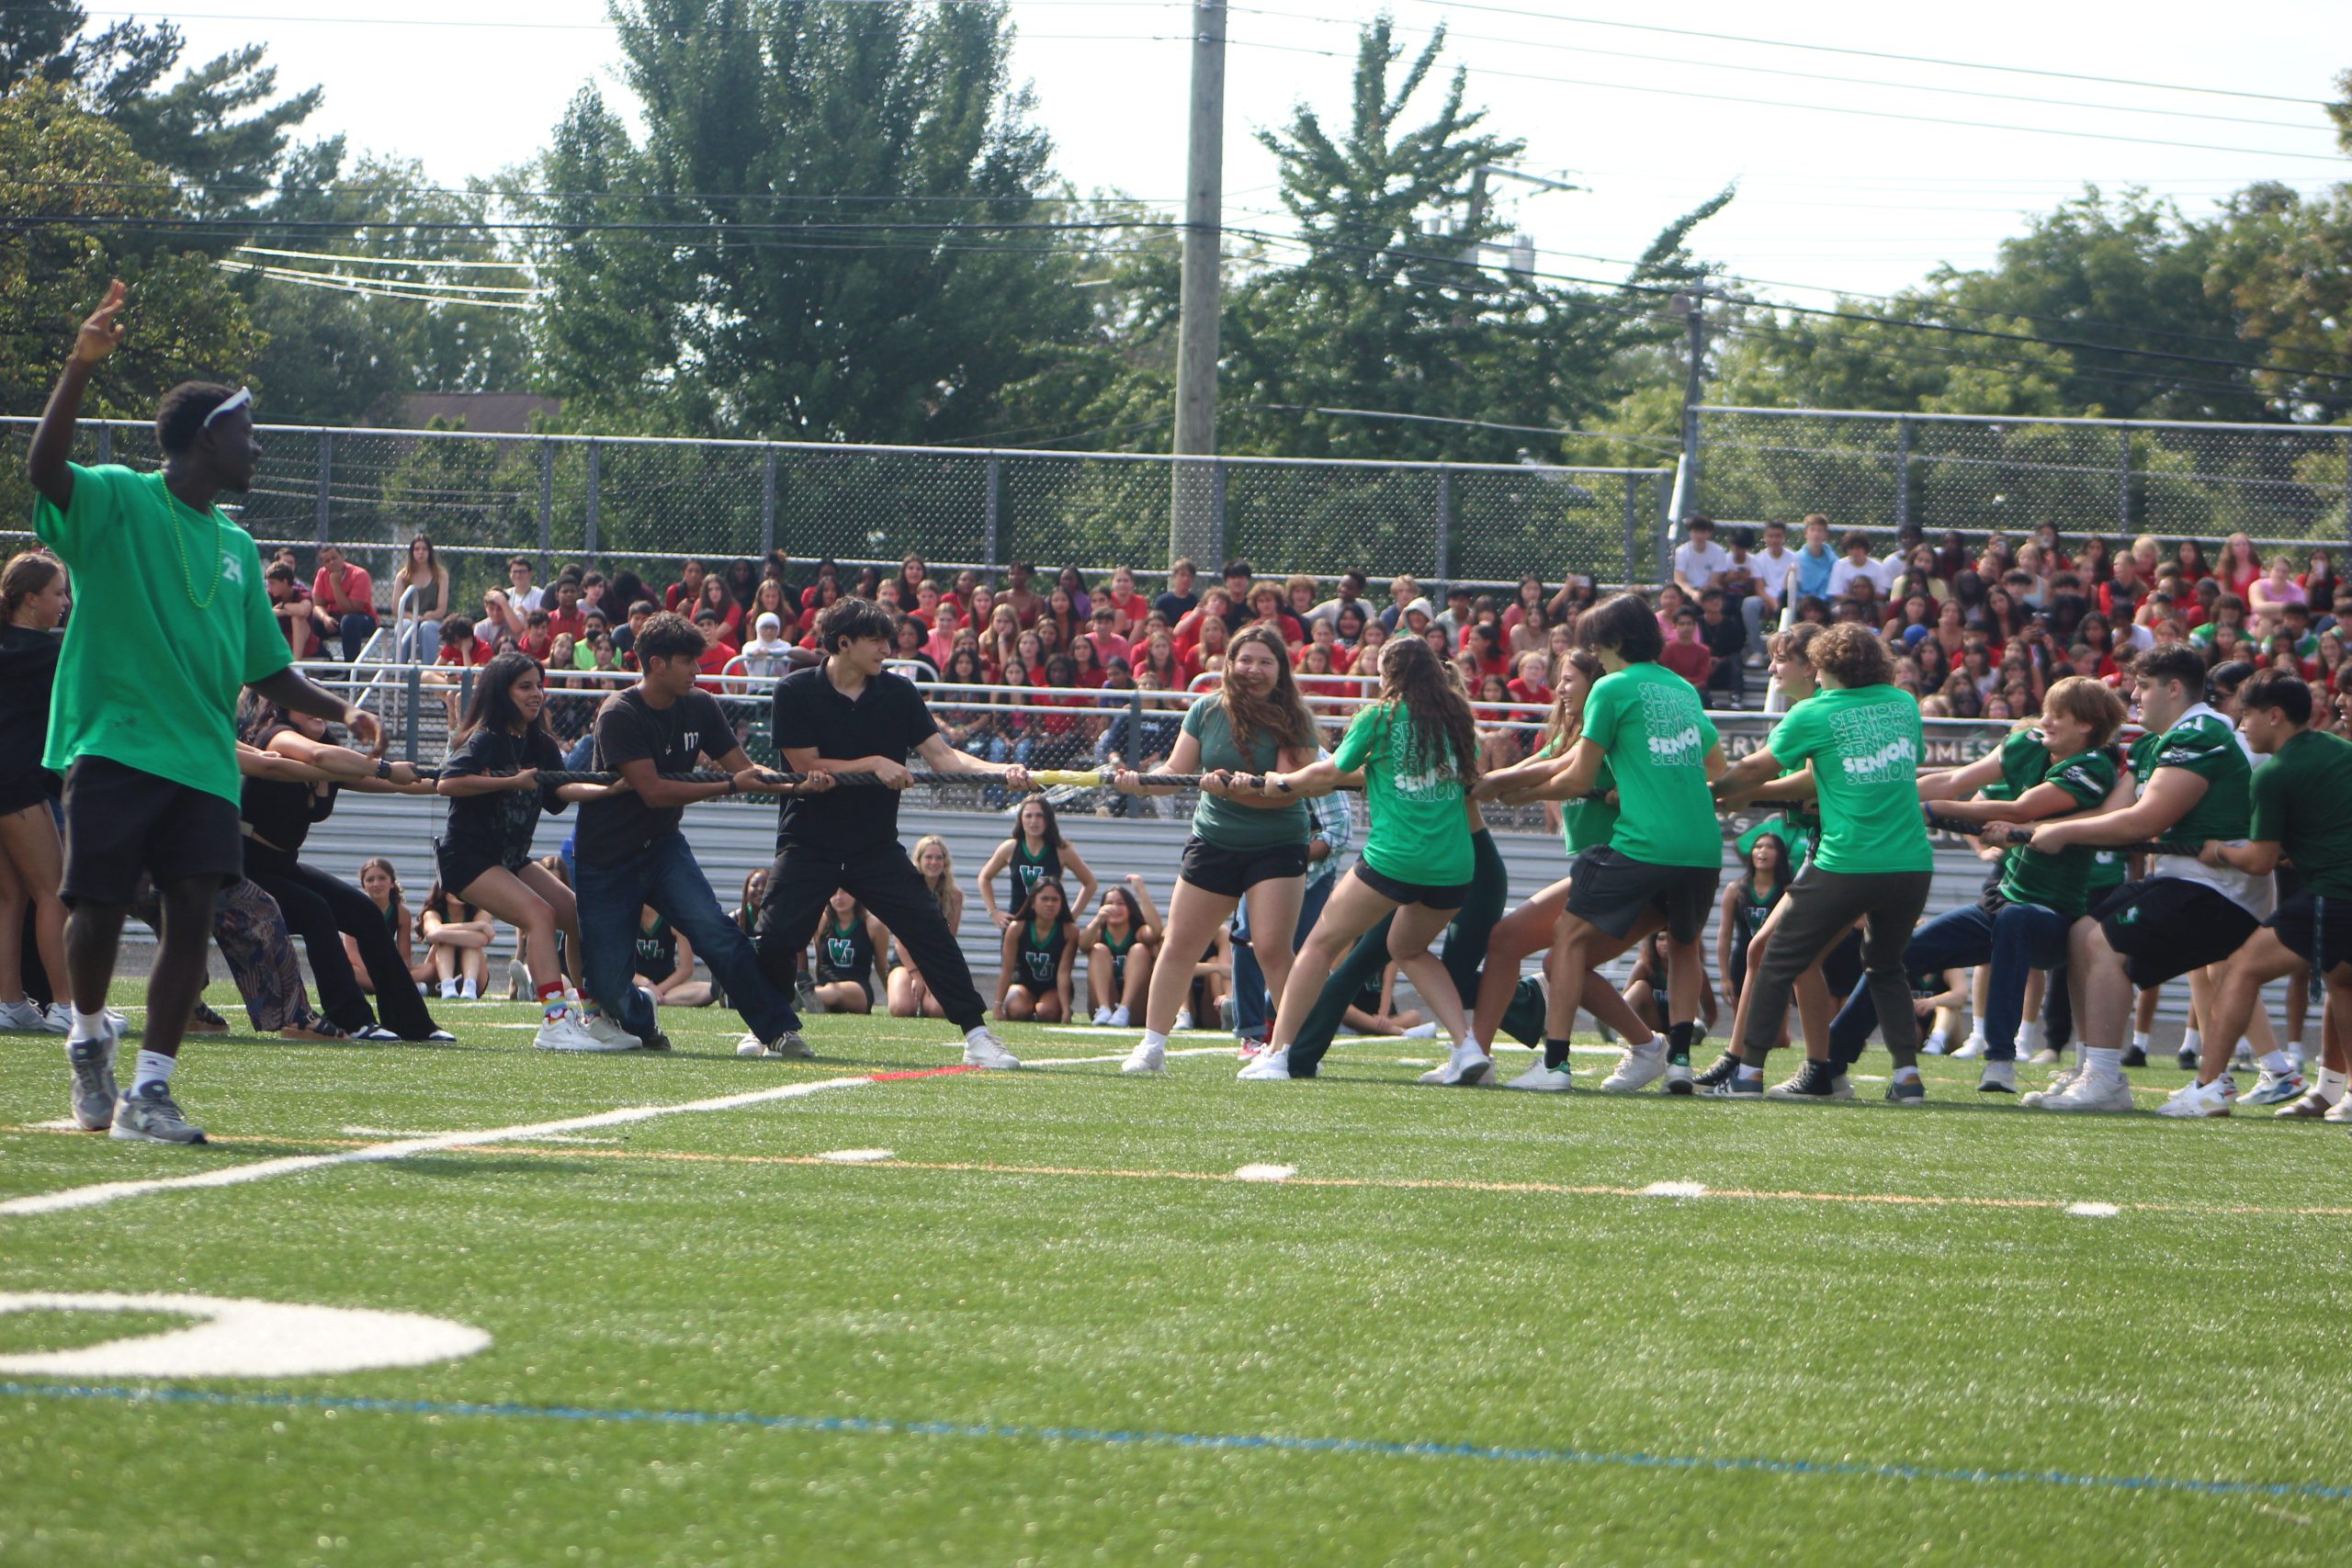 Freshmen watch in the distance as the juniors and seniors face off on the 50-yard line in the annual tug-of-war. The seniors overpowered the juniors on-route to winning the whole tournament.